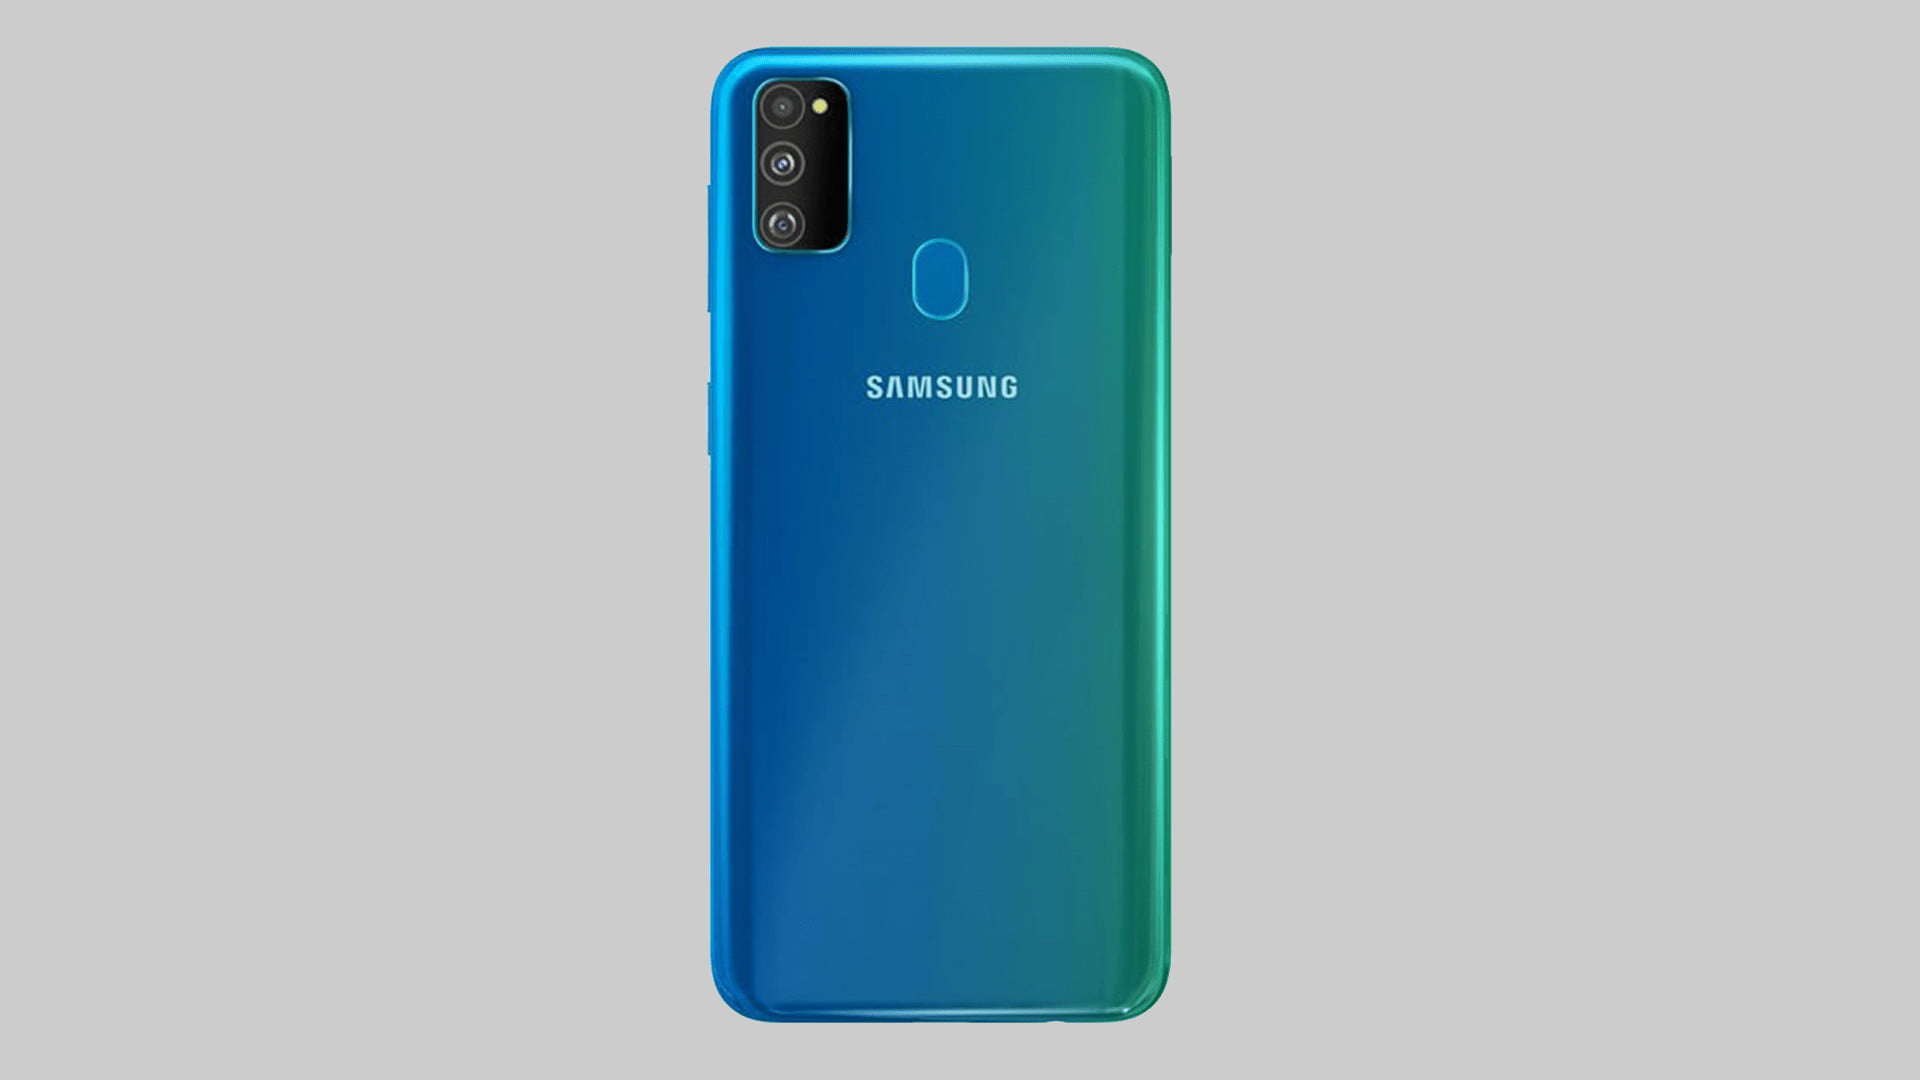 Samsung Galaxy M30s from the rear